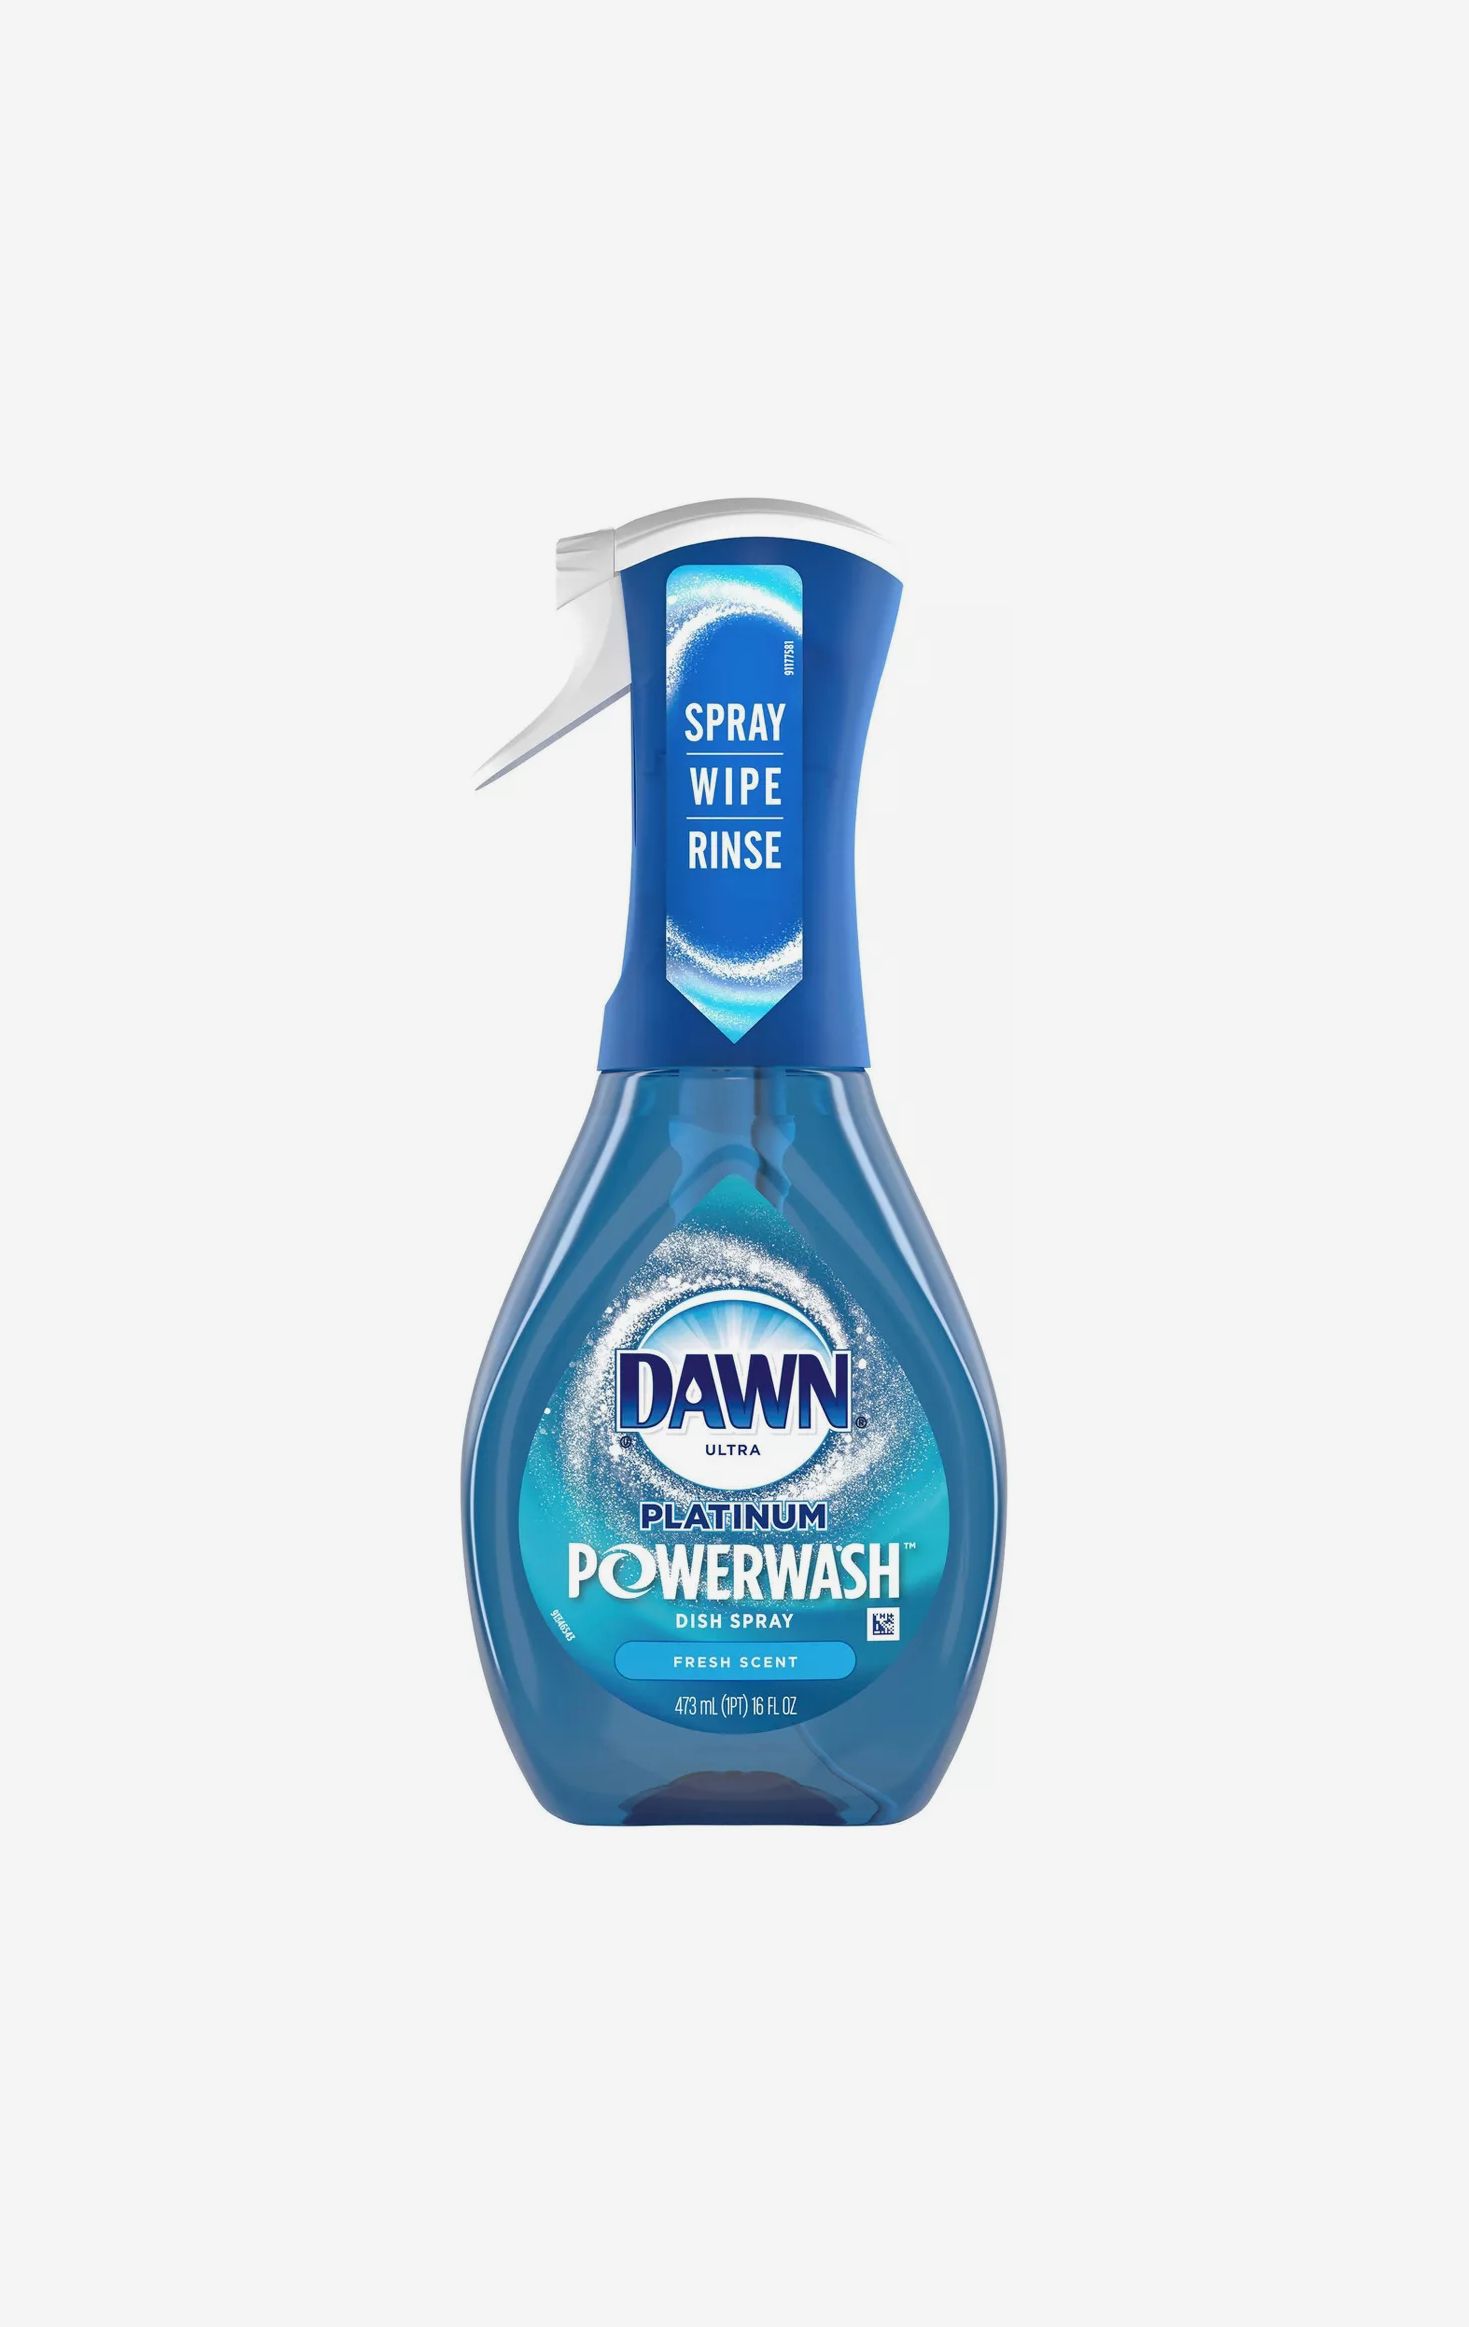 25 Products To Hand-Wash Your Dishes With 2021